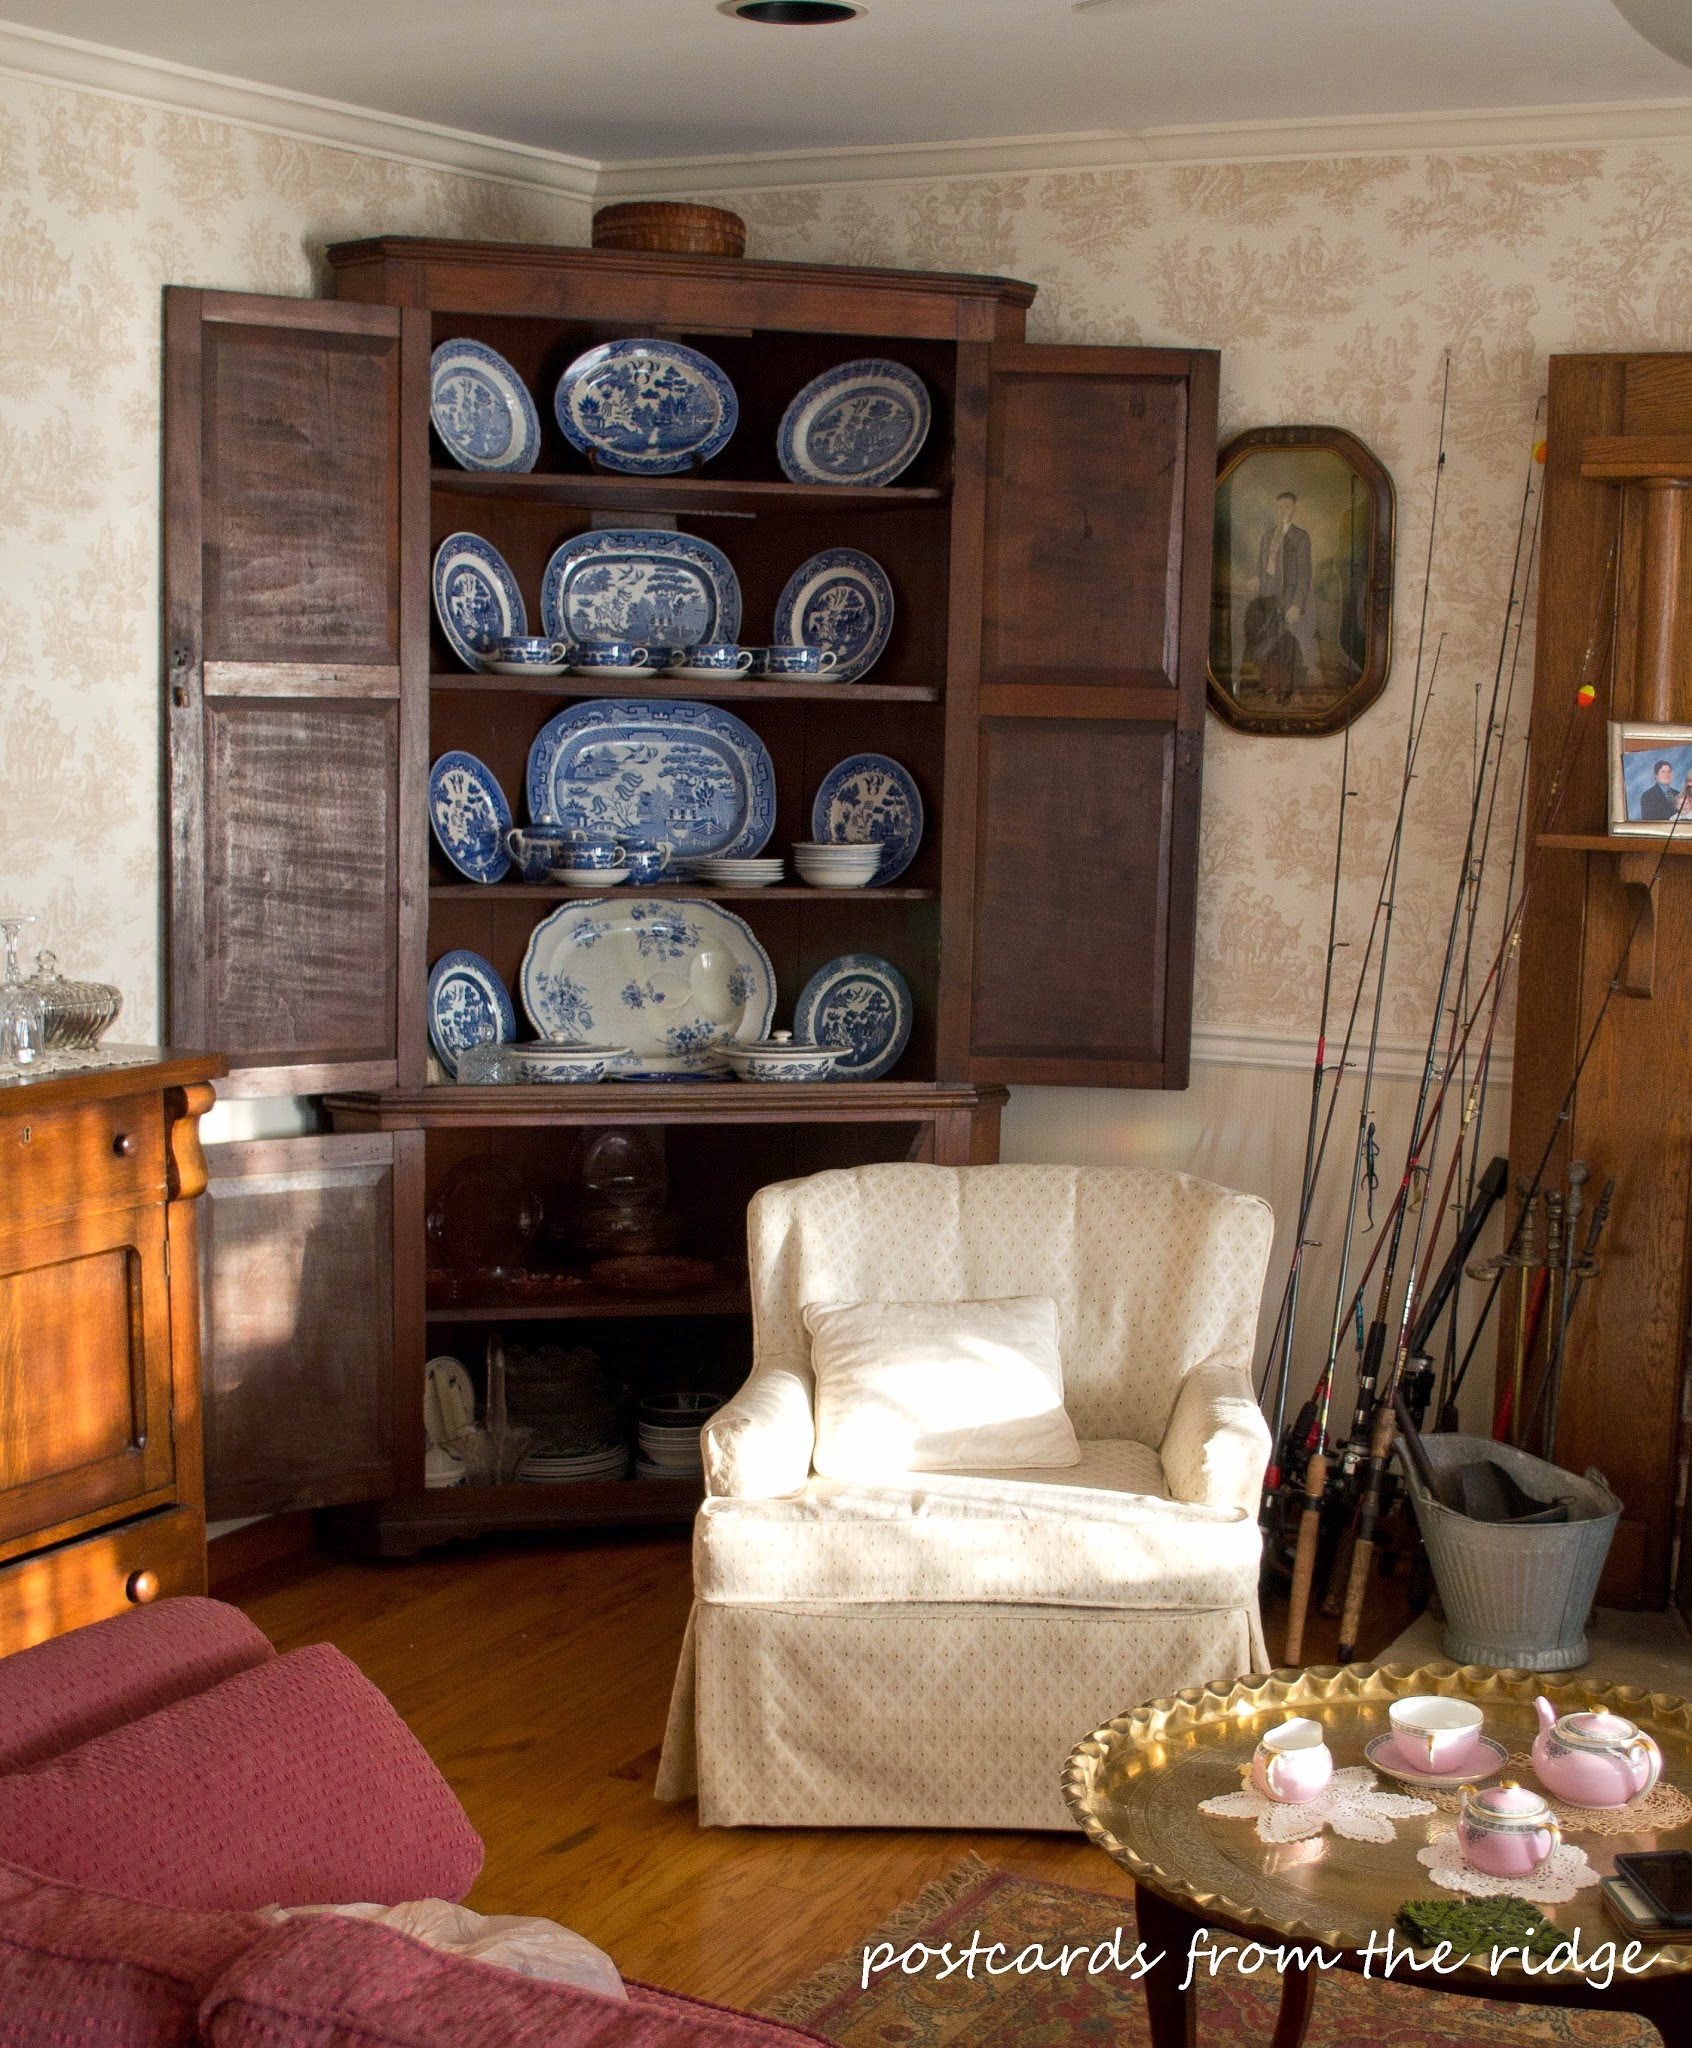 Love the blue and white dishes in the antique corner cabinet.